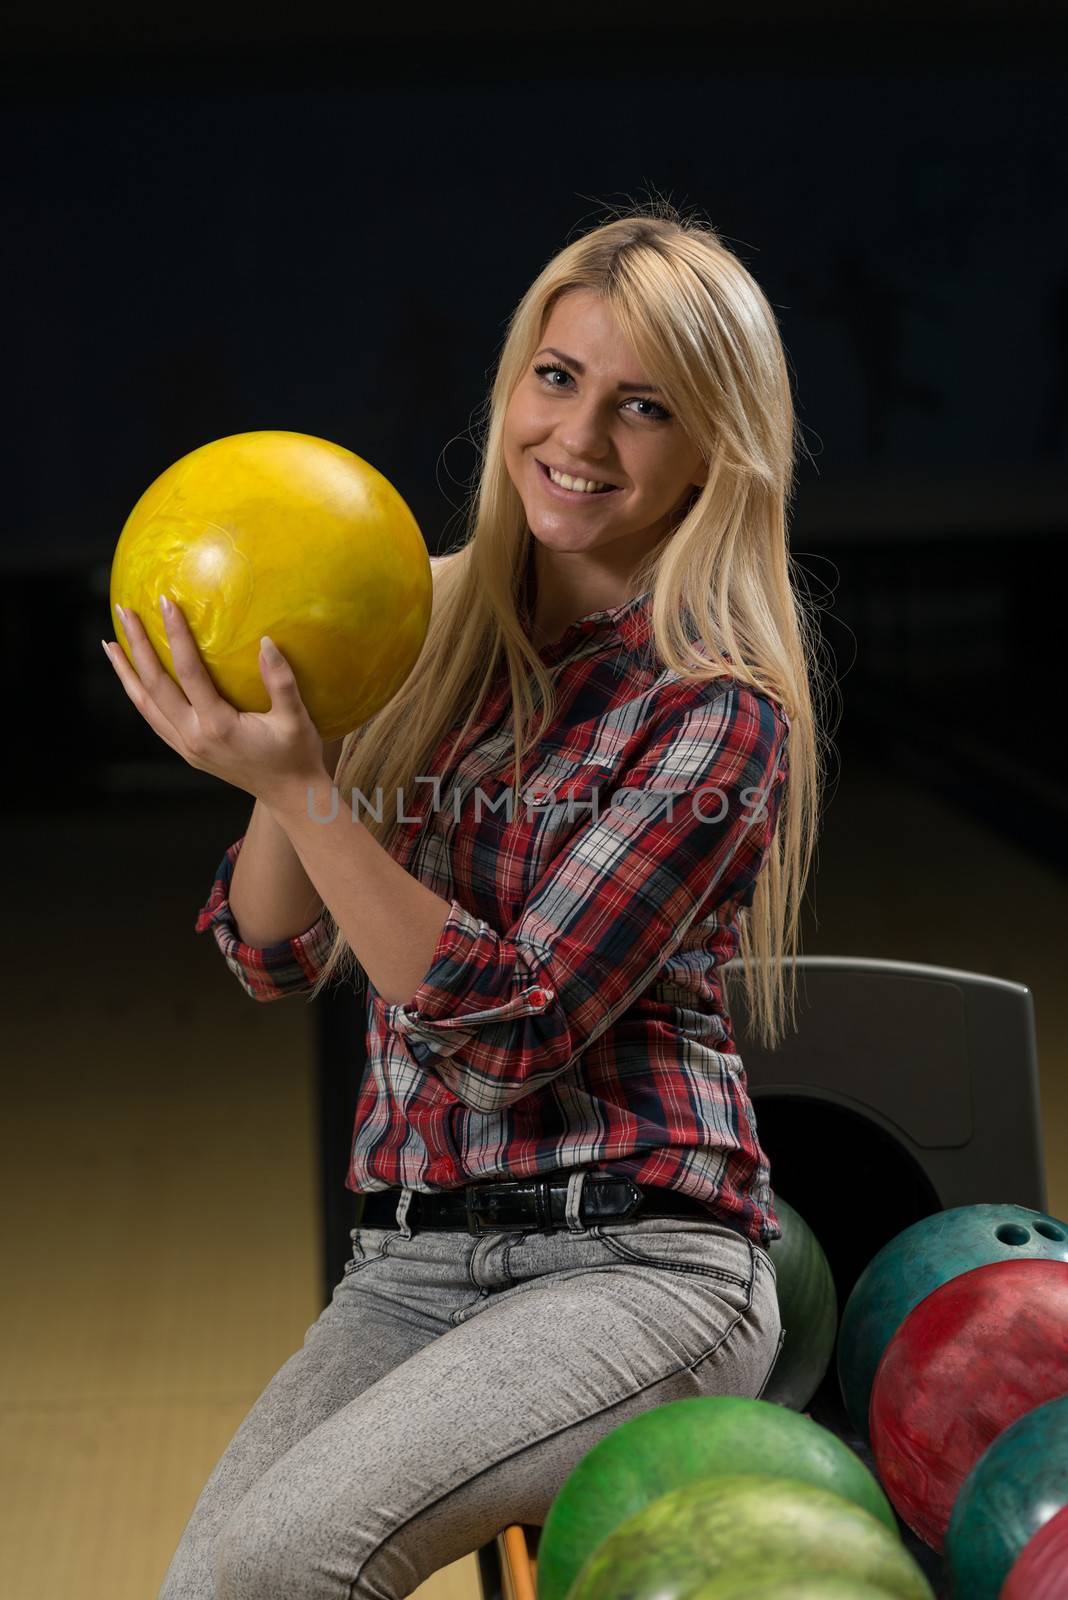 Women Holding A Bowling Ball by JalePhoto